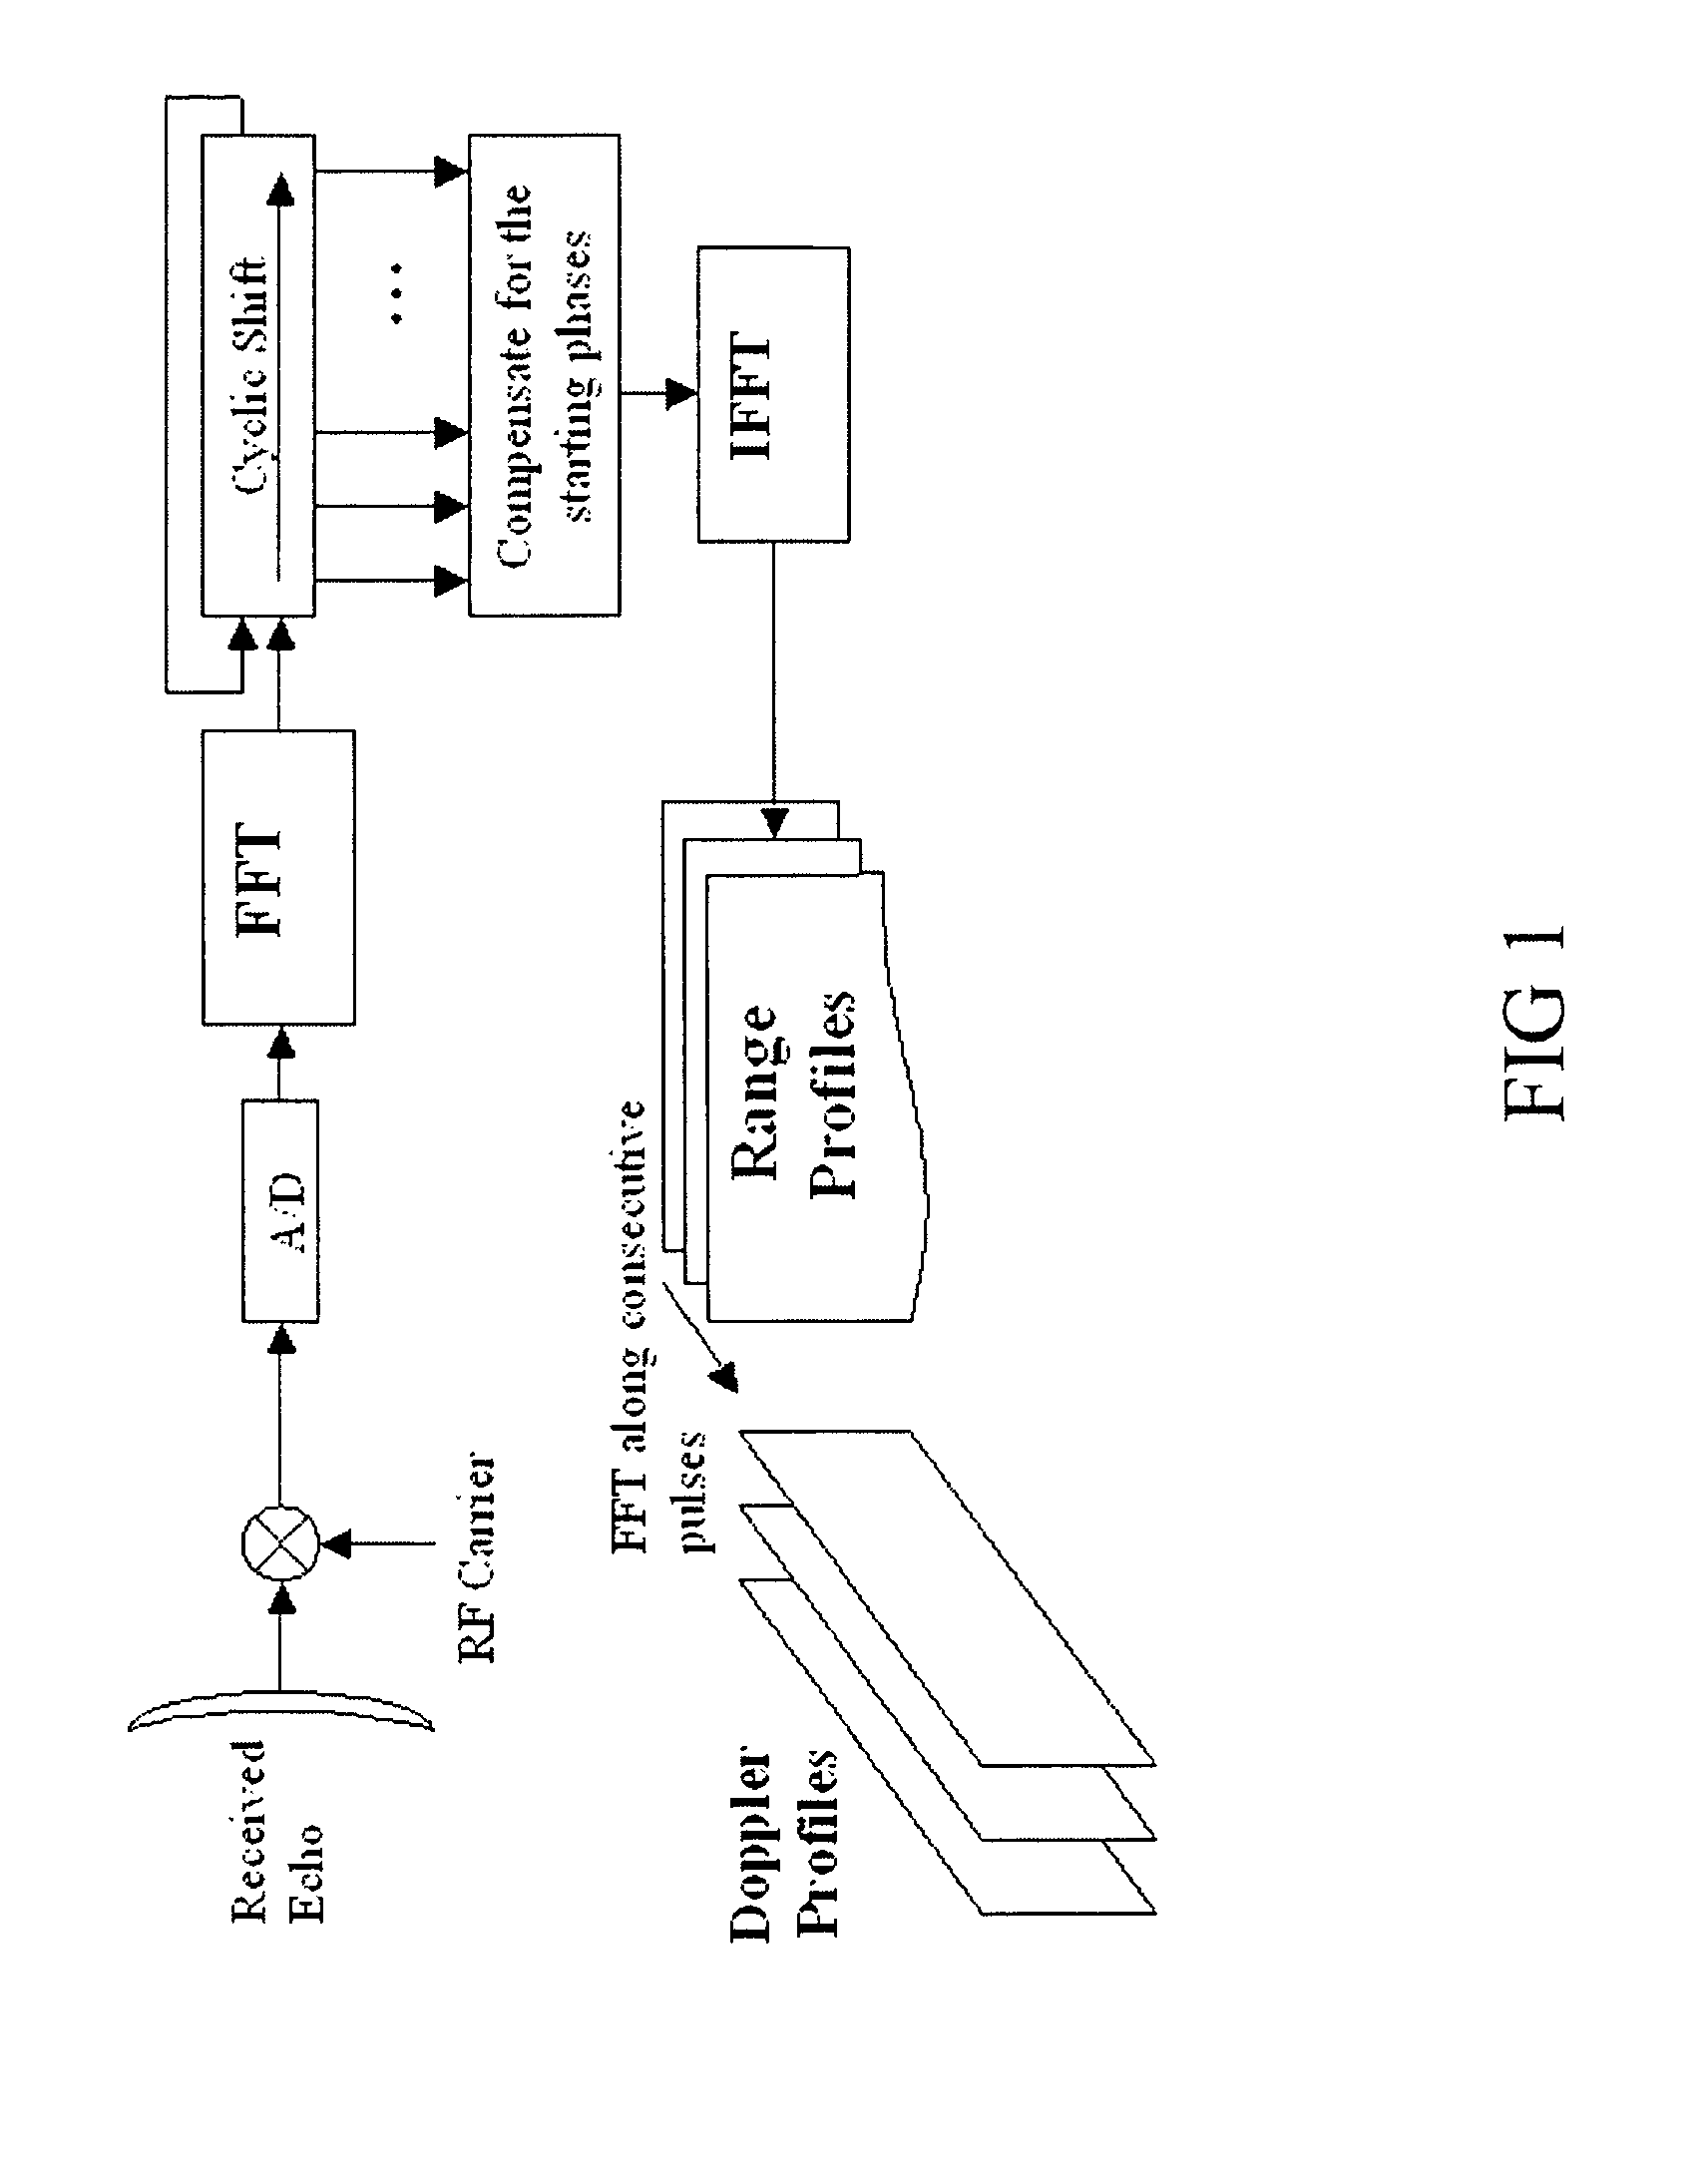 Method for measuring the radial velocity of a target with a doppler radar